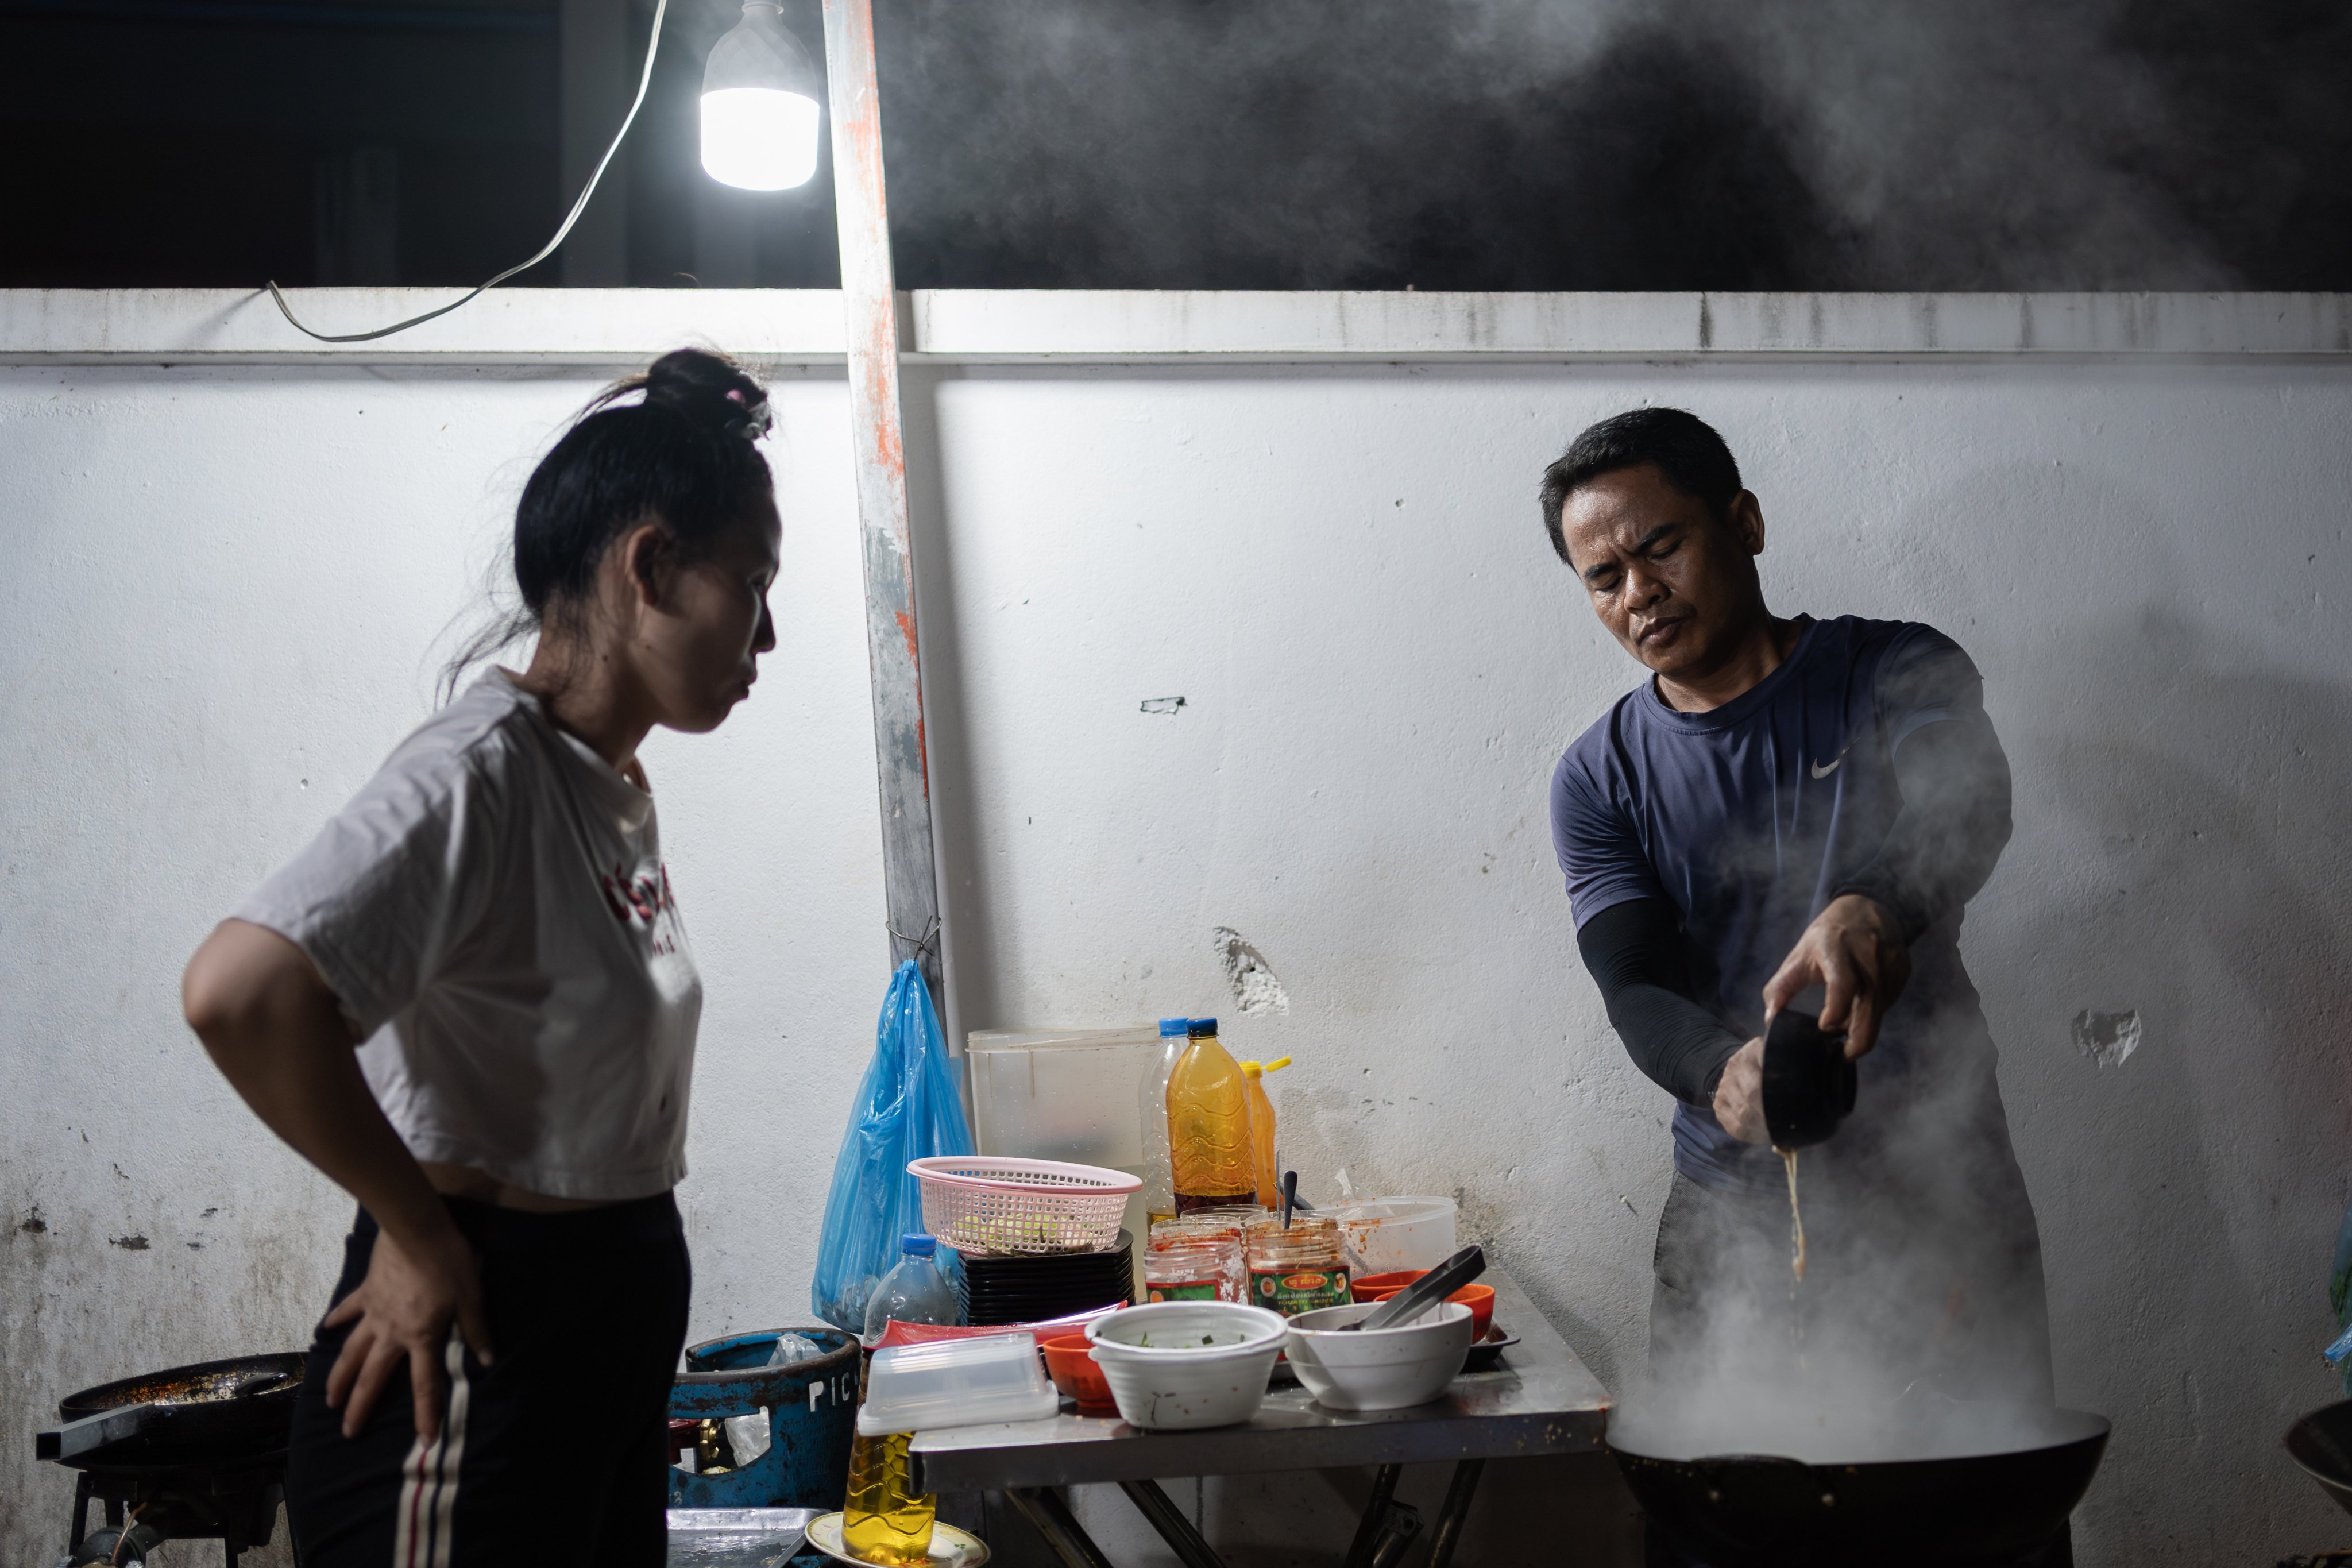 18th June, 2023 - Siem Reap (Cambodia). Kalida watches as her husband Chin Meas fries noodles for their customers. In 2015, Meas moved to Siem Reap to set up a noodle store with his wife. Now, cooking noodles 14 hours a day every day to make ends meet, the renowned poet struggles to find time to write poetry anymore. Credit: Andy Ball